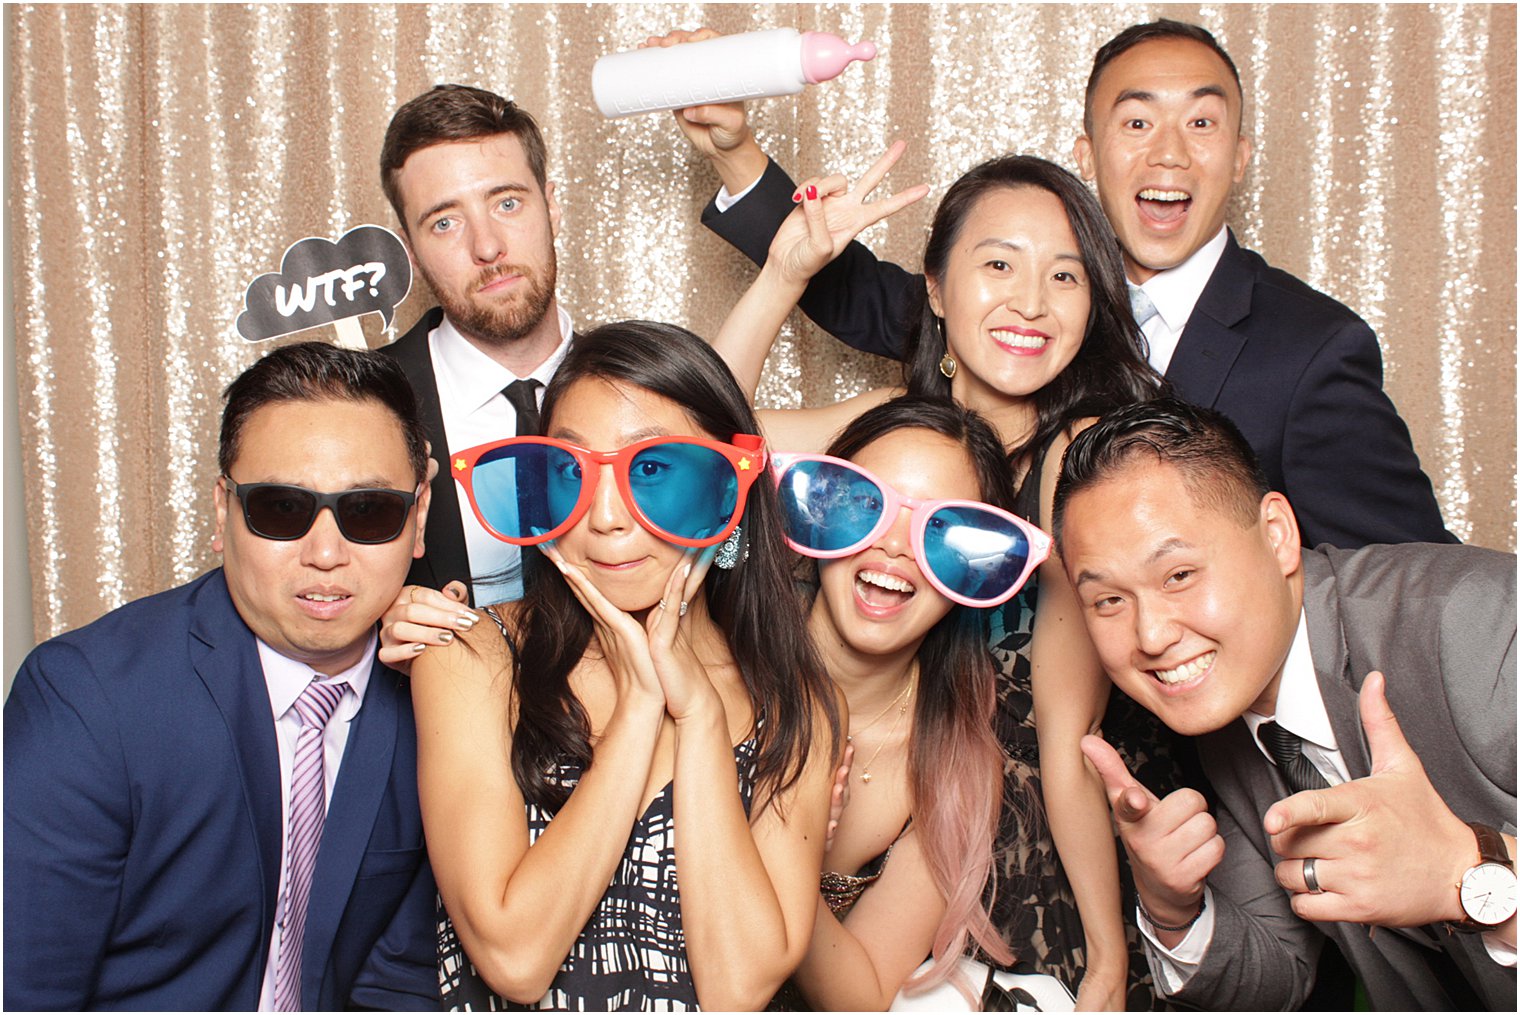 photo booth fun in New Jersey from Idalia Photography